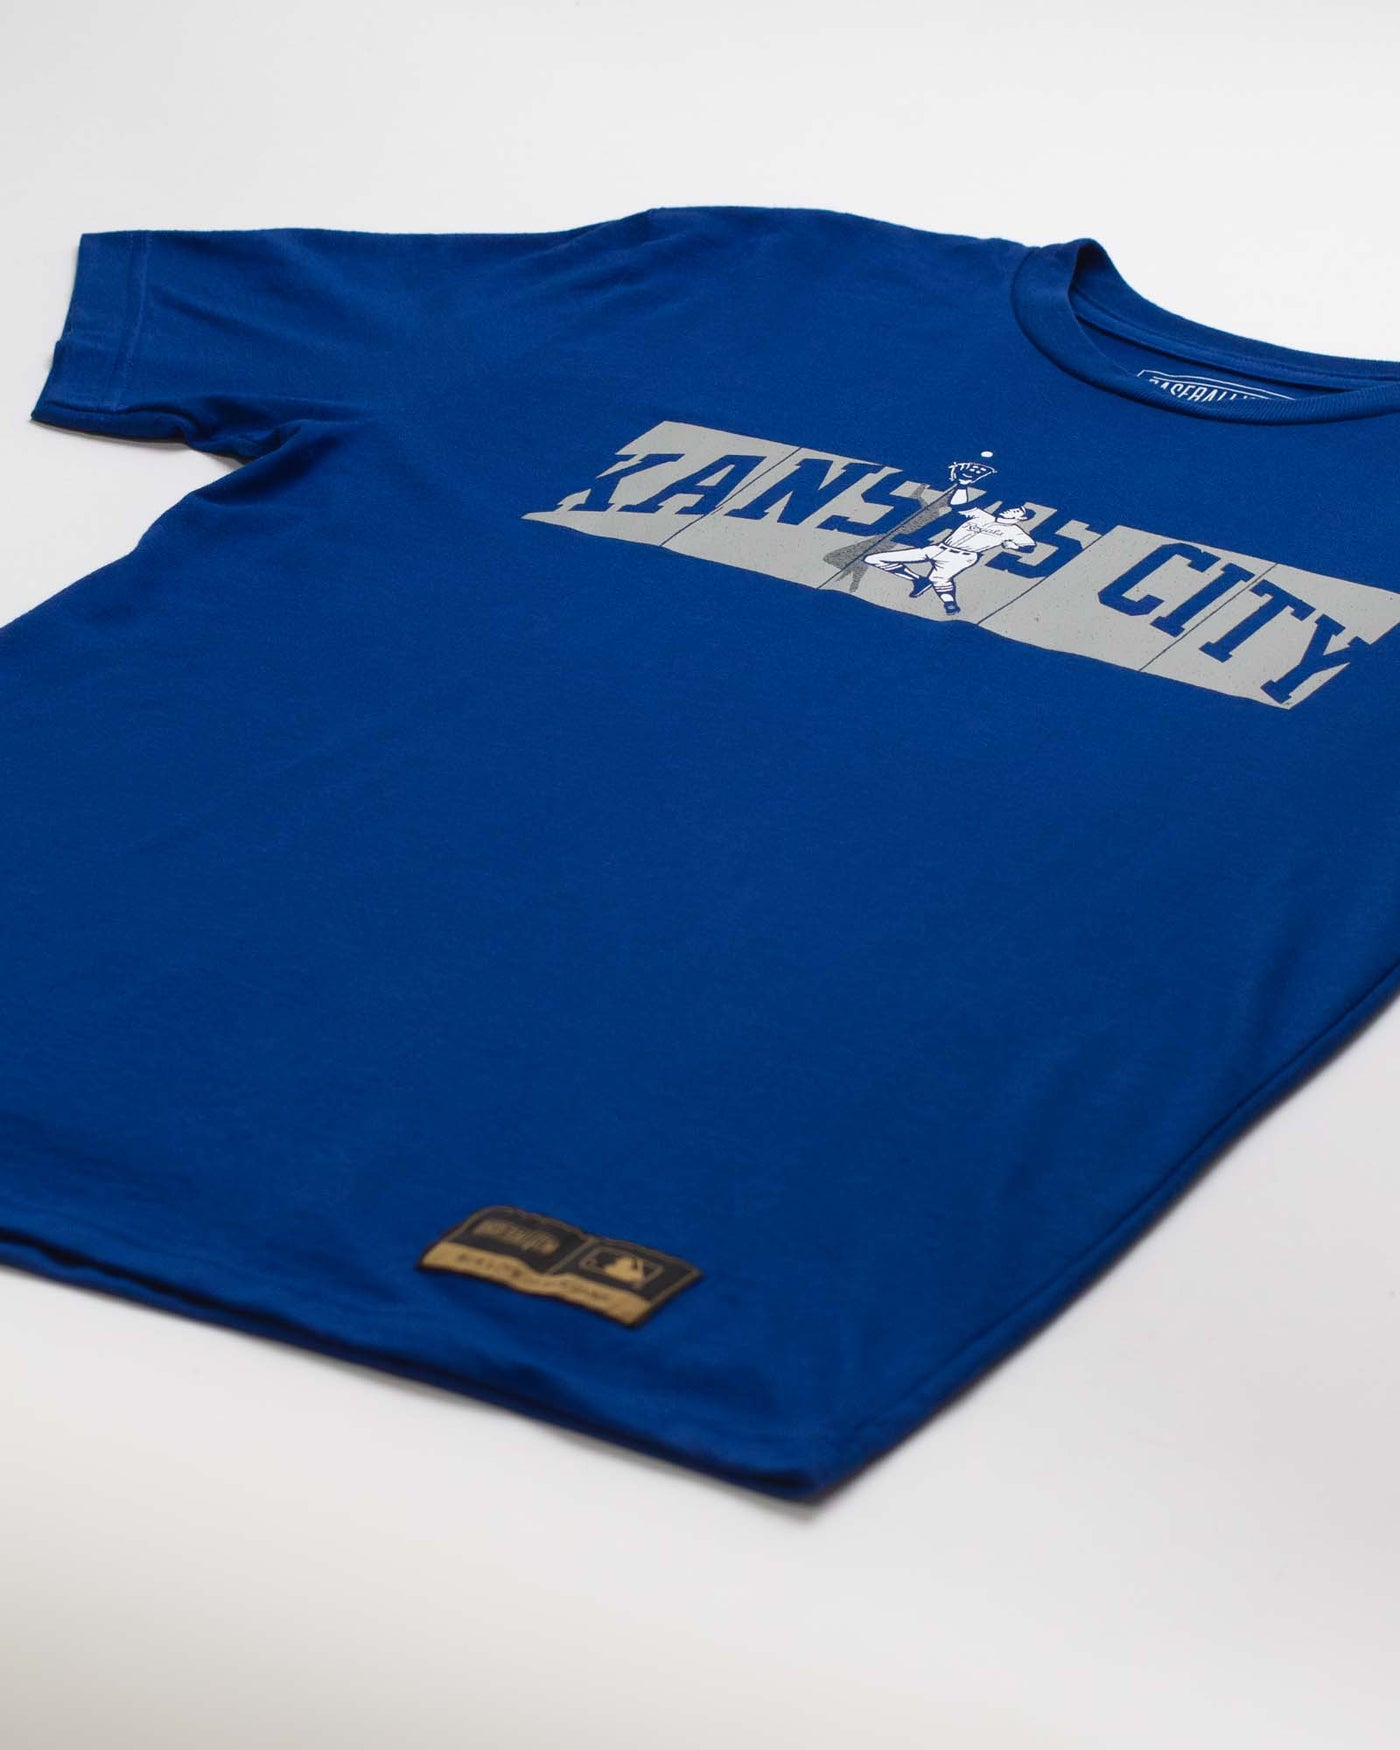 Outfield Fence Tee - Kansas City Royals